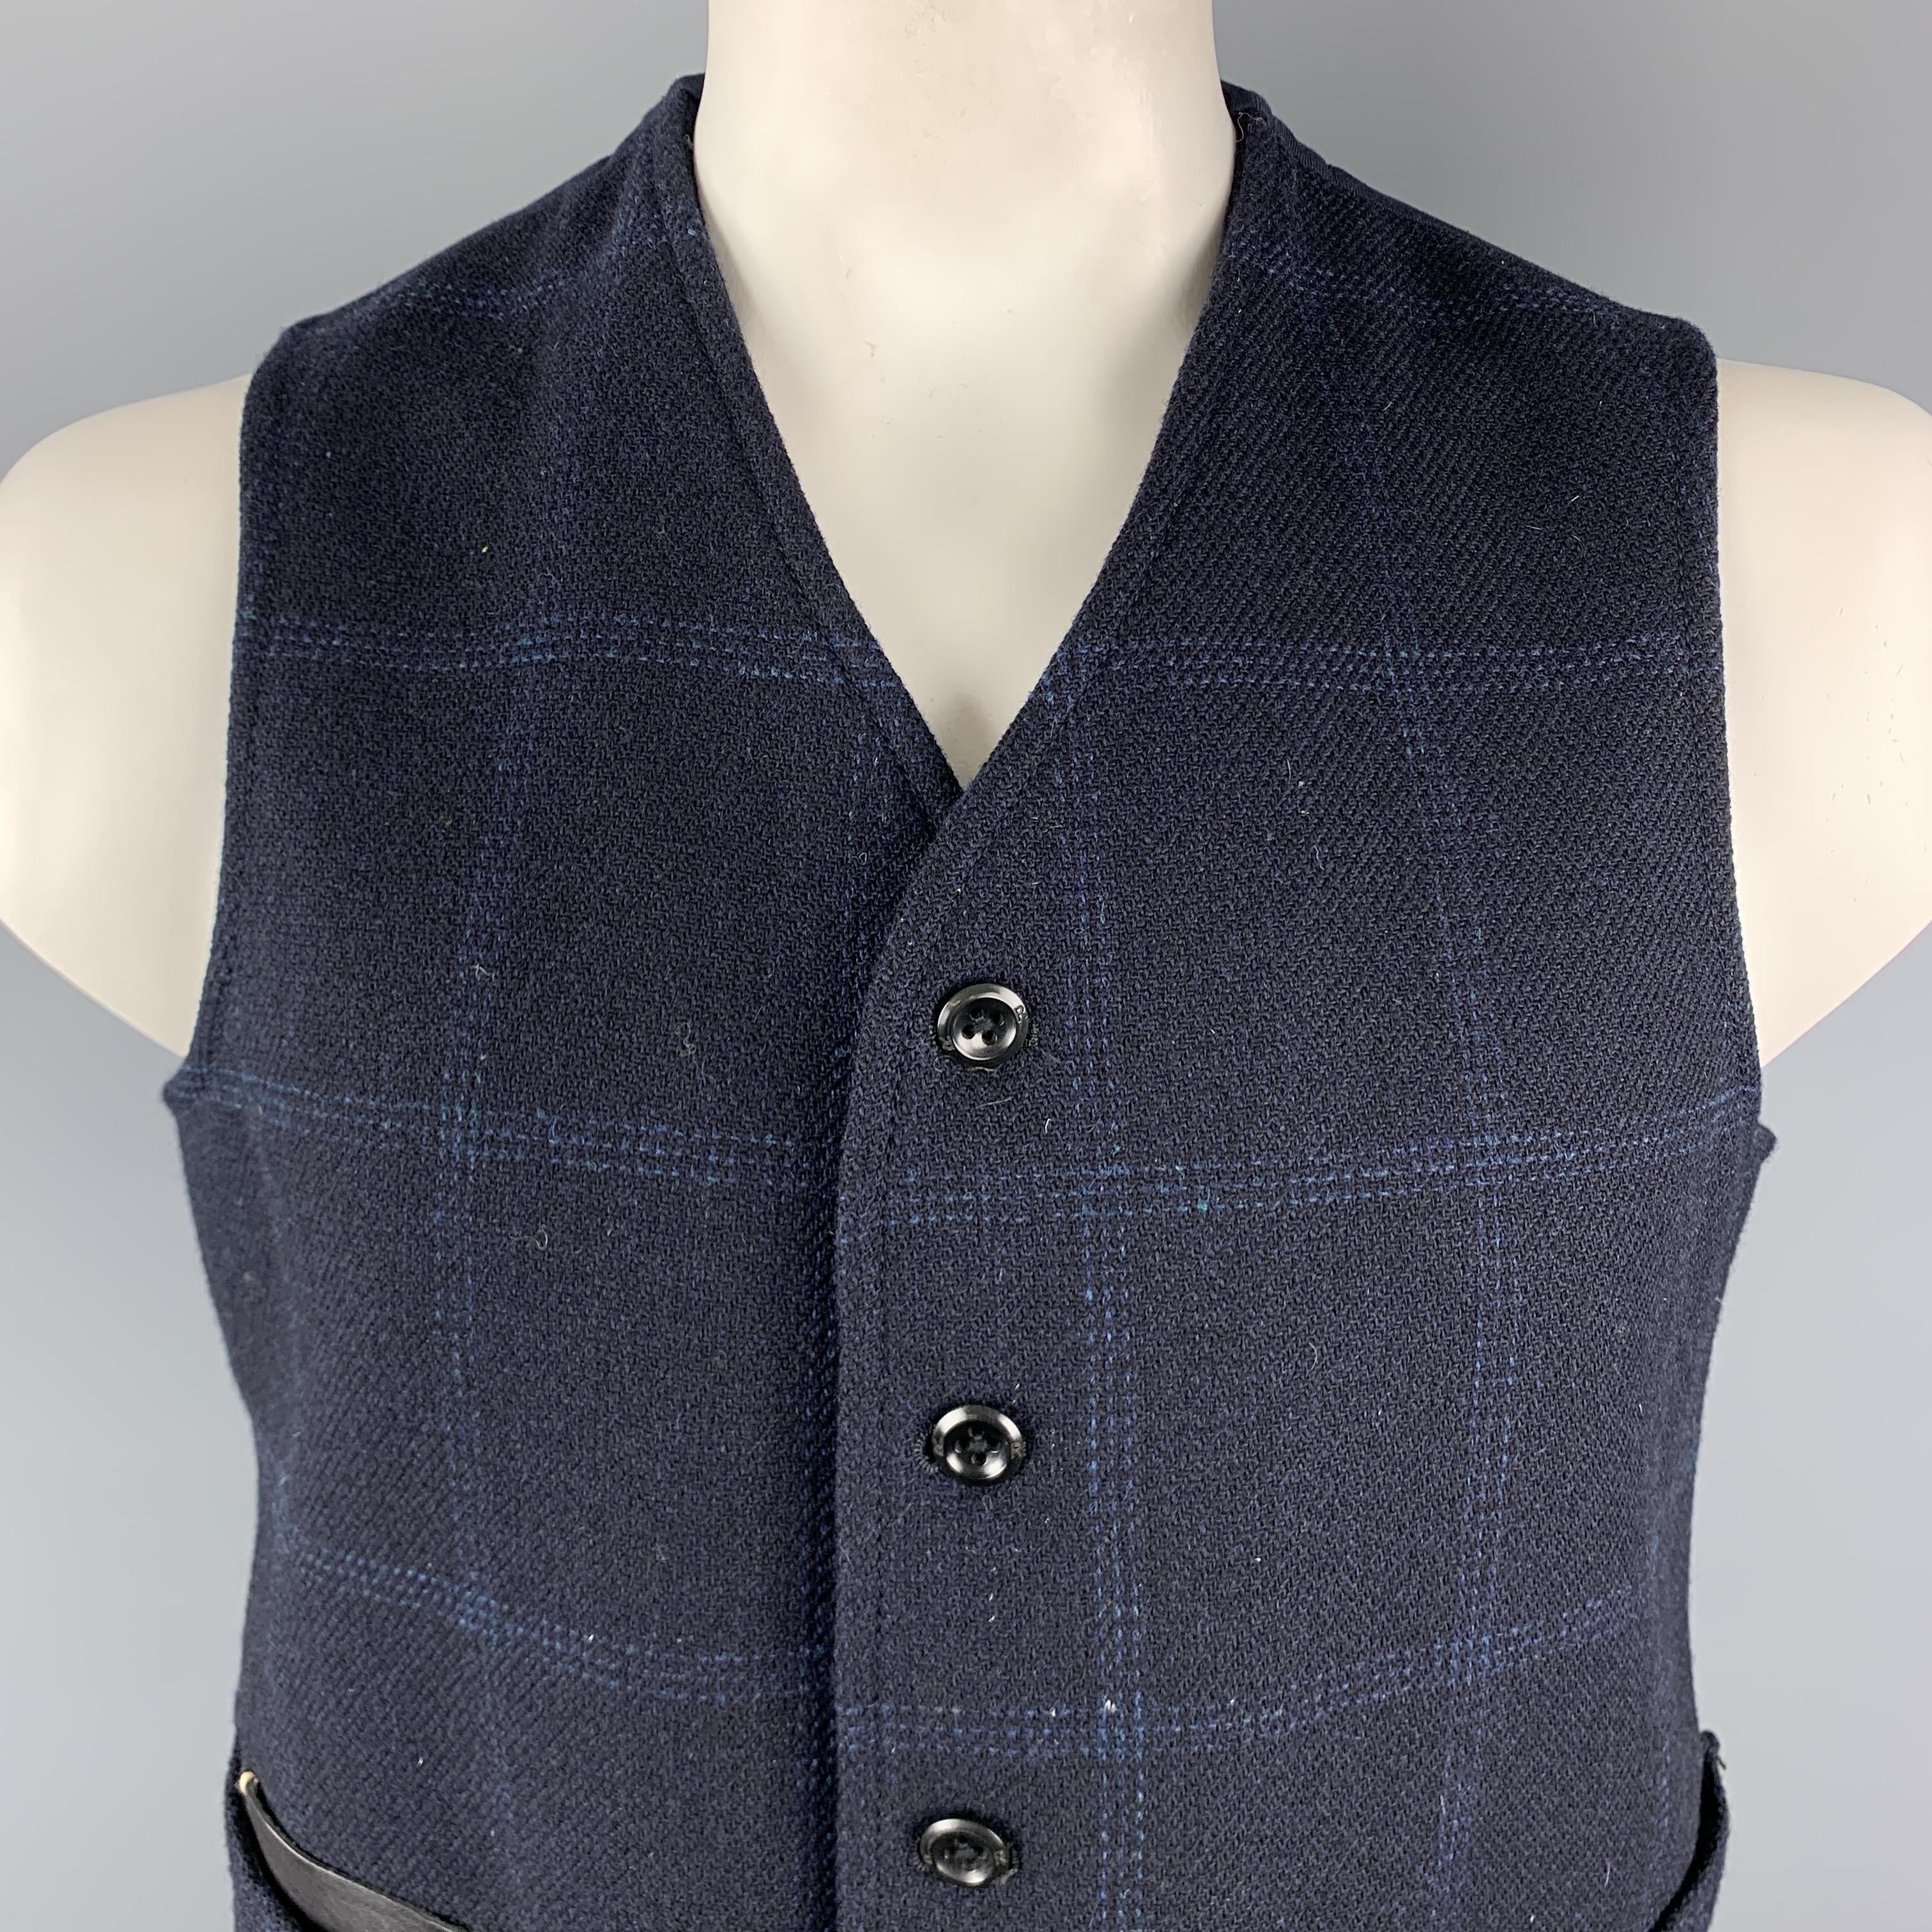 45RPM vest comes in navy plaid FOX BROTHERS & CO wool with a V neck button front, cotton chambray back and liner, and horse leather patch pocket. Made in Japan.

Excellent Pre-Owned Condition.
Marked: JP 5

Measurements:

Shoulder: 14 in.
Chest: 45